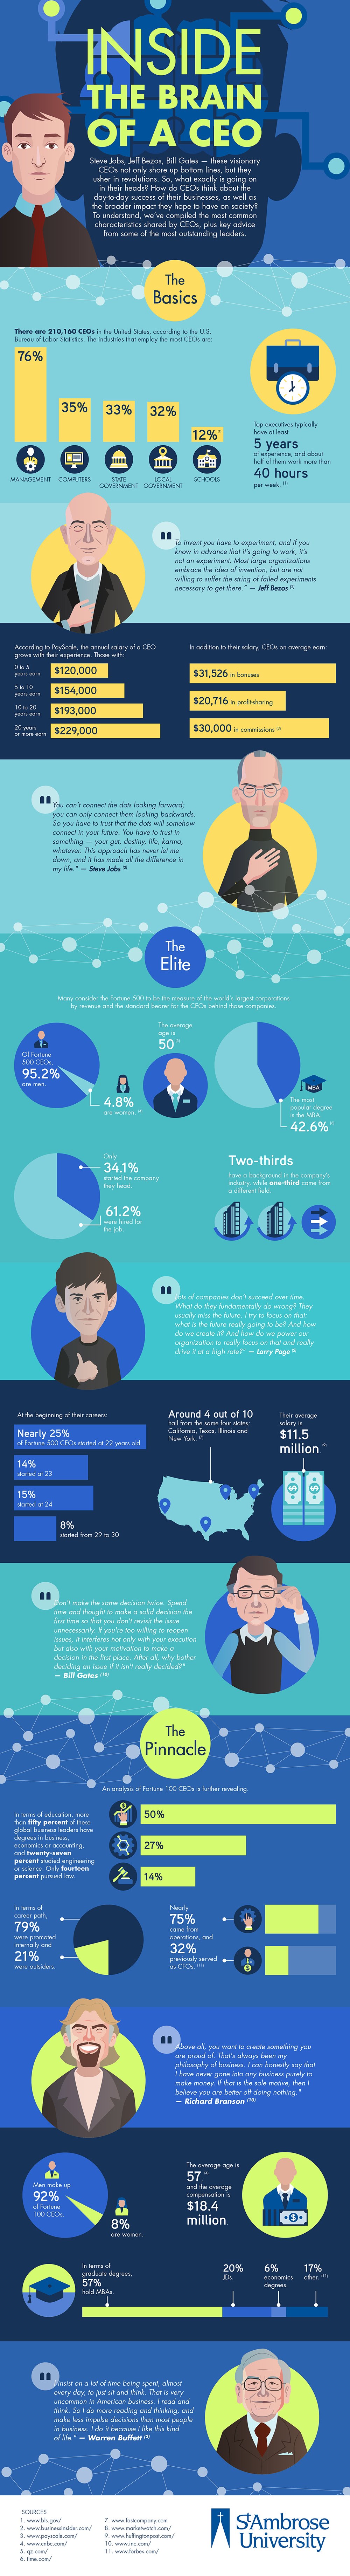 Inside the Brain of a CEO #infographic